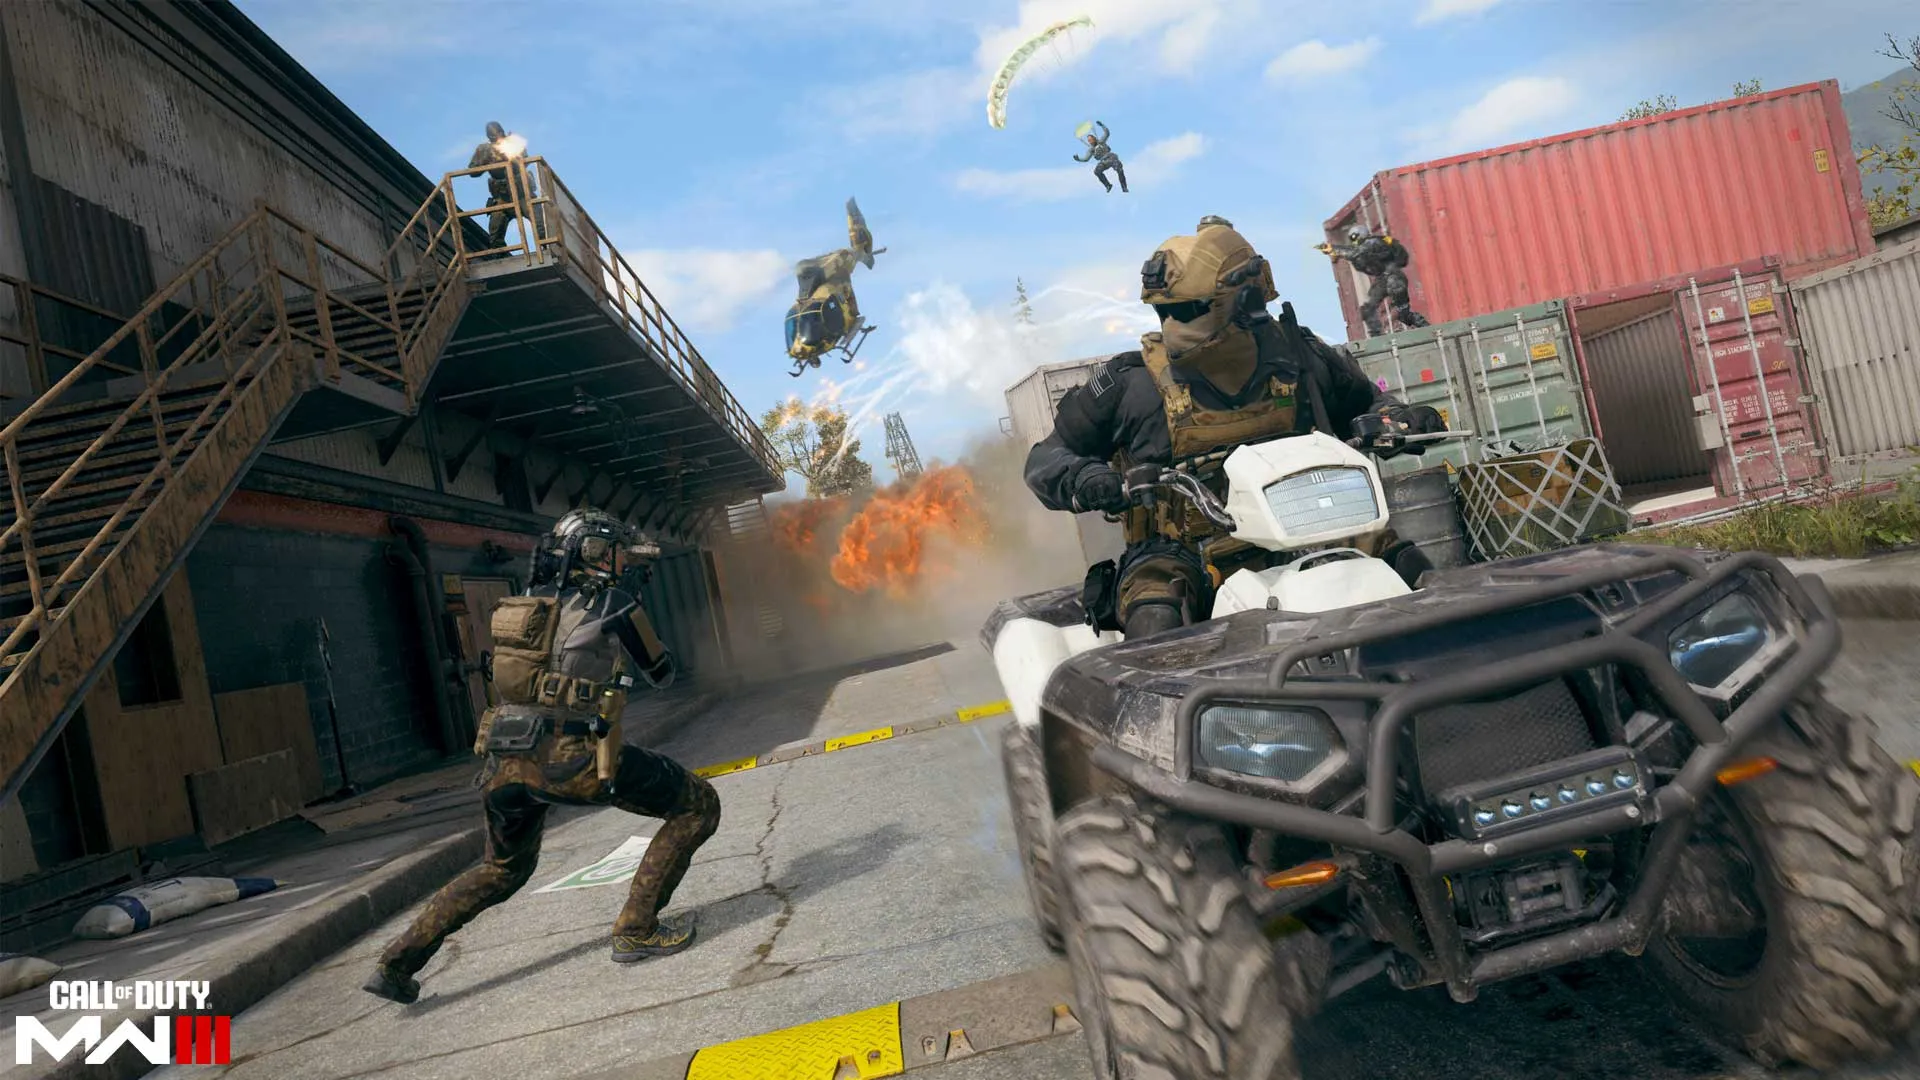 Modern Warfare 3 Season 1 Reloaded: Modern Warfare 3 Season 1 Reloaded:  This is what we know about release date, new weapons, map, game modes and  more - The Economic Times